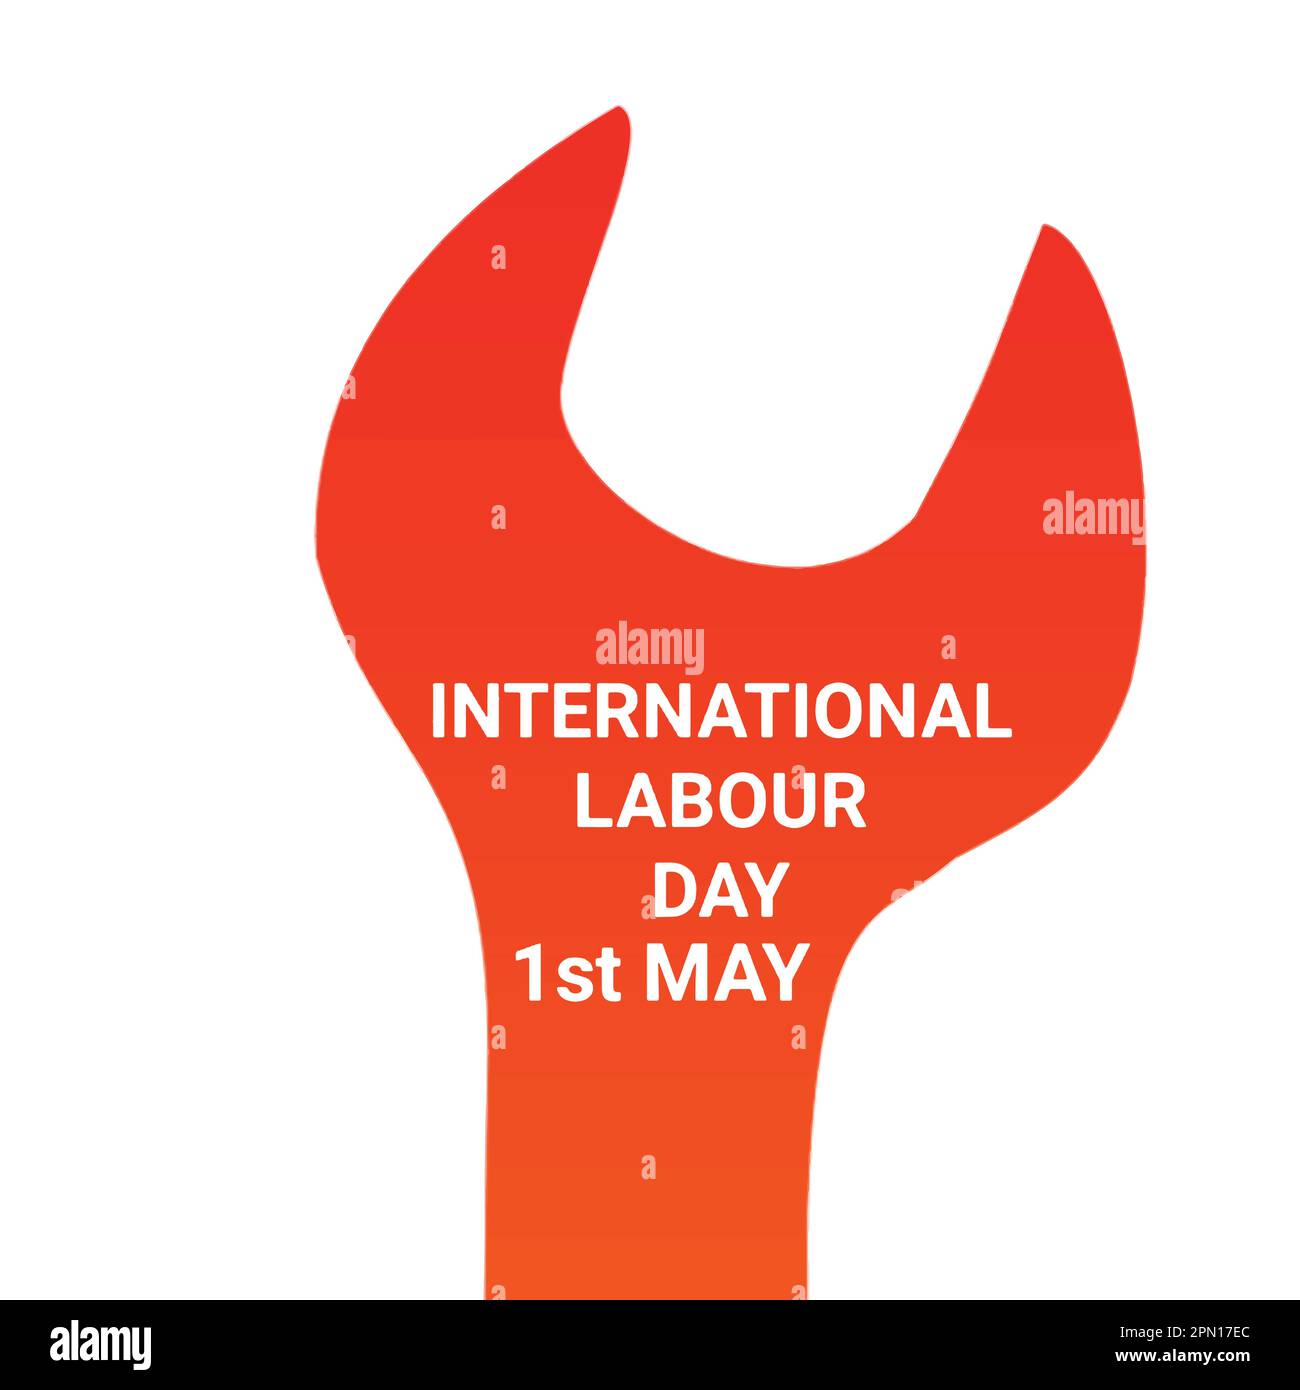 International Labour Day. 1st May. Holiday concept. Template for background, banner, card, poster with text inscription. Vector illustration. Stock Vector